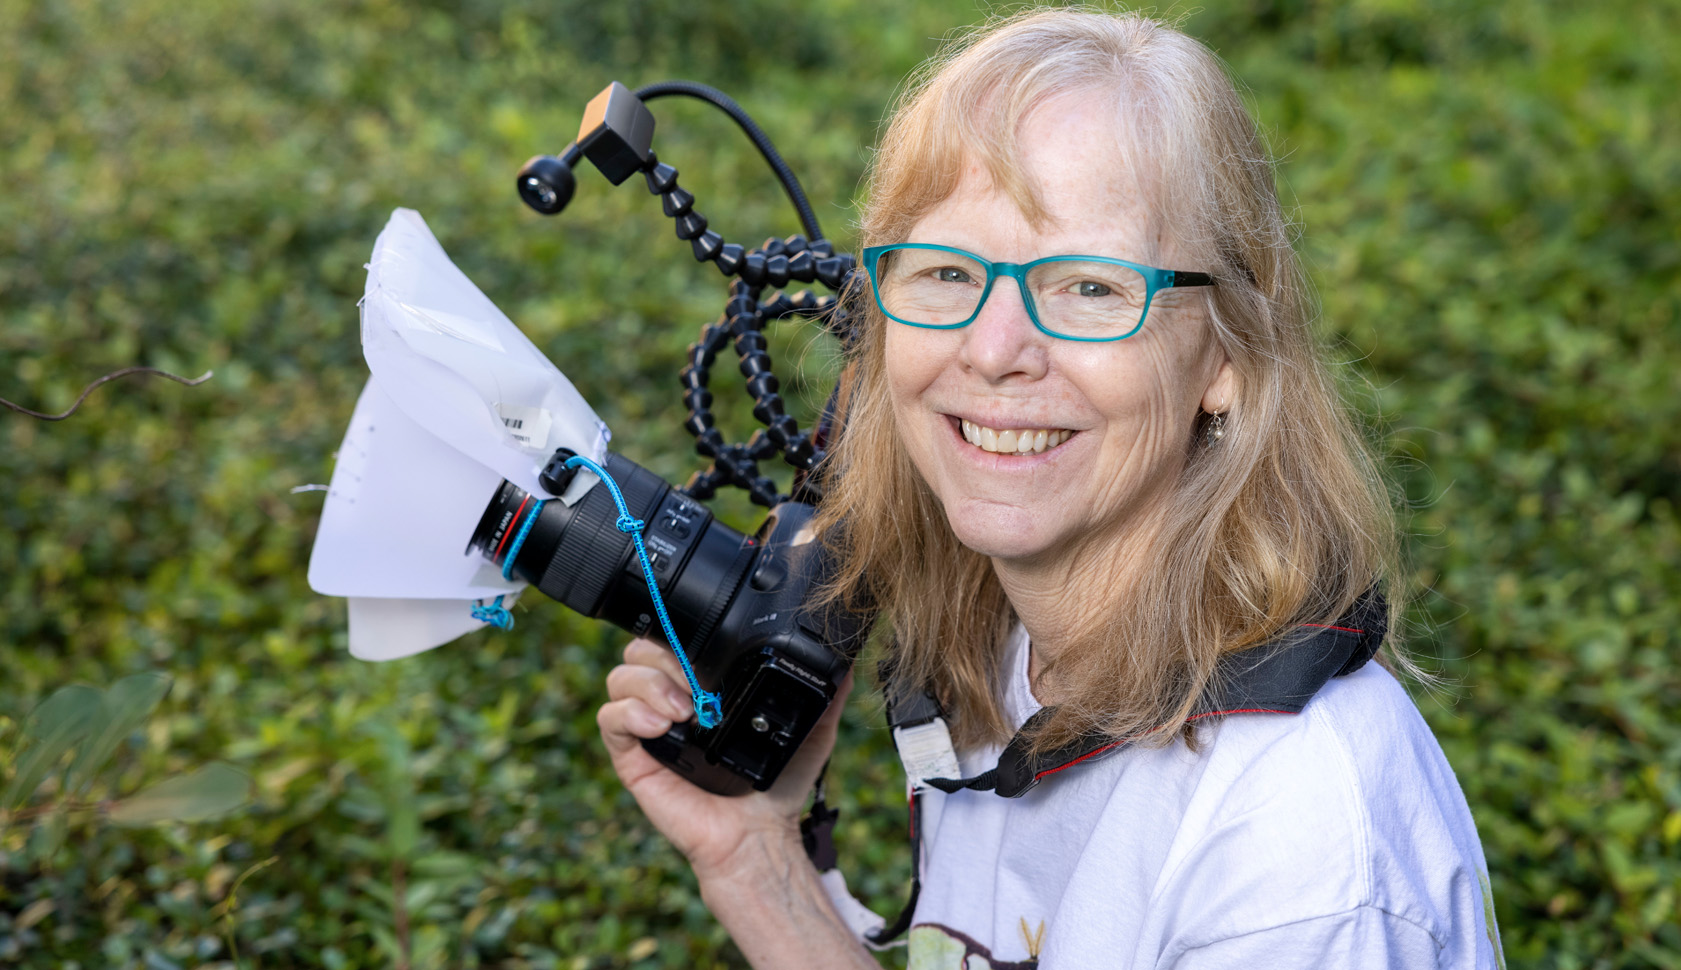 Jena Johnson, a research professional in the Department of Entomology, has been interested in photography since graduate school, when she first experimented with a 35mm camera. Over the years, she’s honed her skills in both research and photography, now documenting a variety of insects with a macro lens.